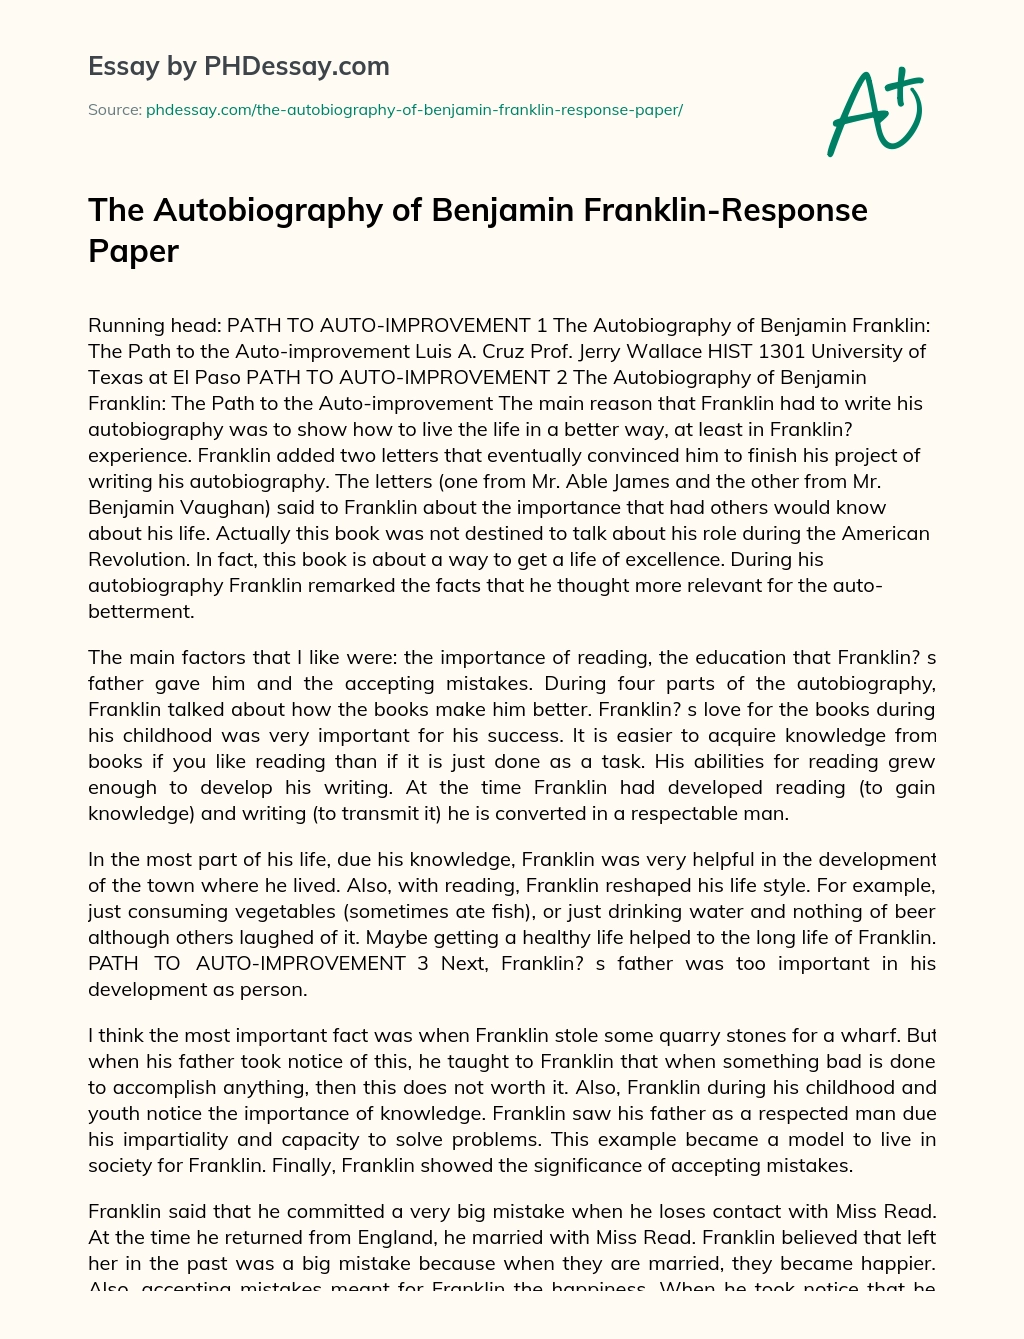 The Autobiography of Benjamin Franklin-Response Paper